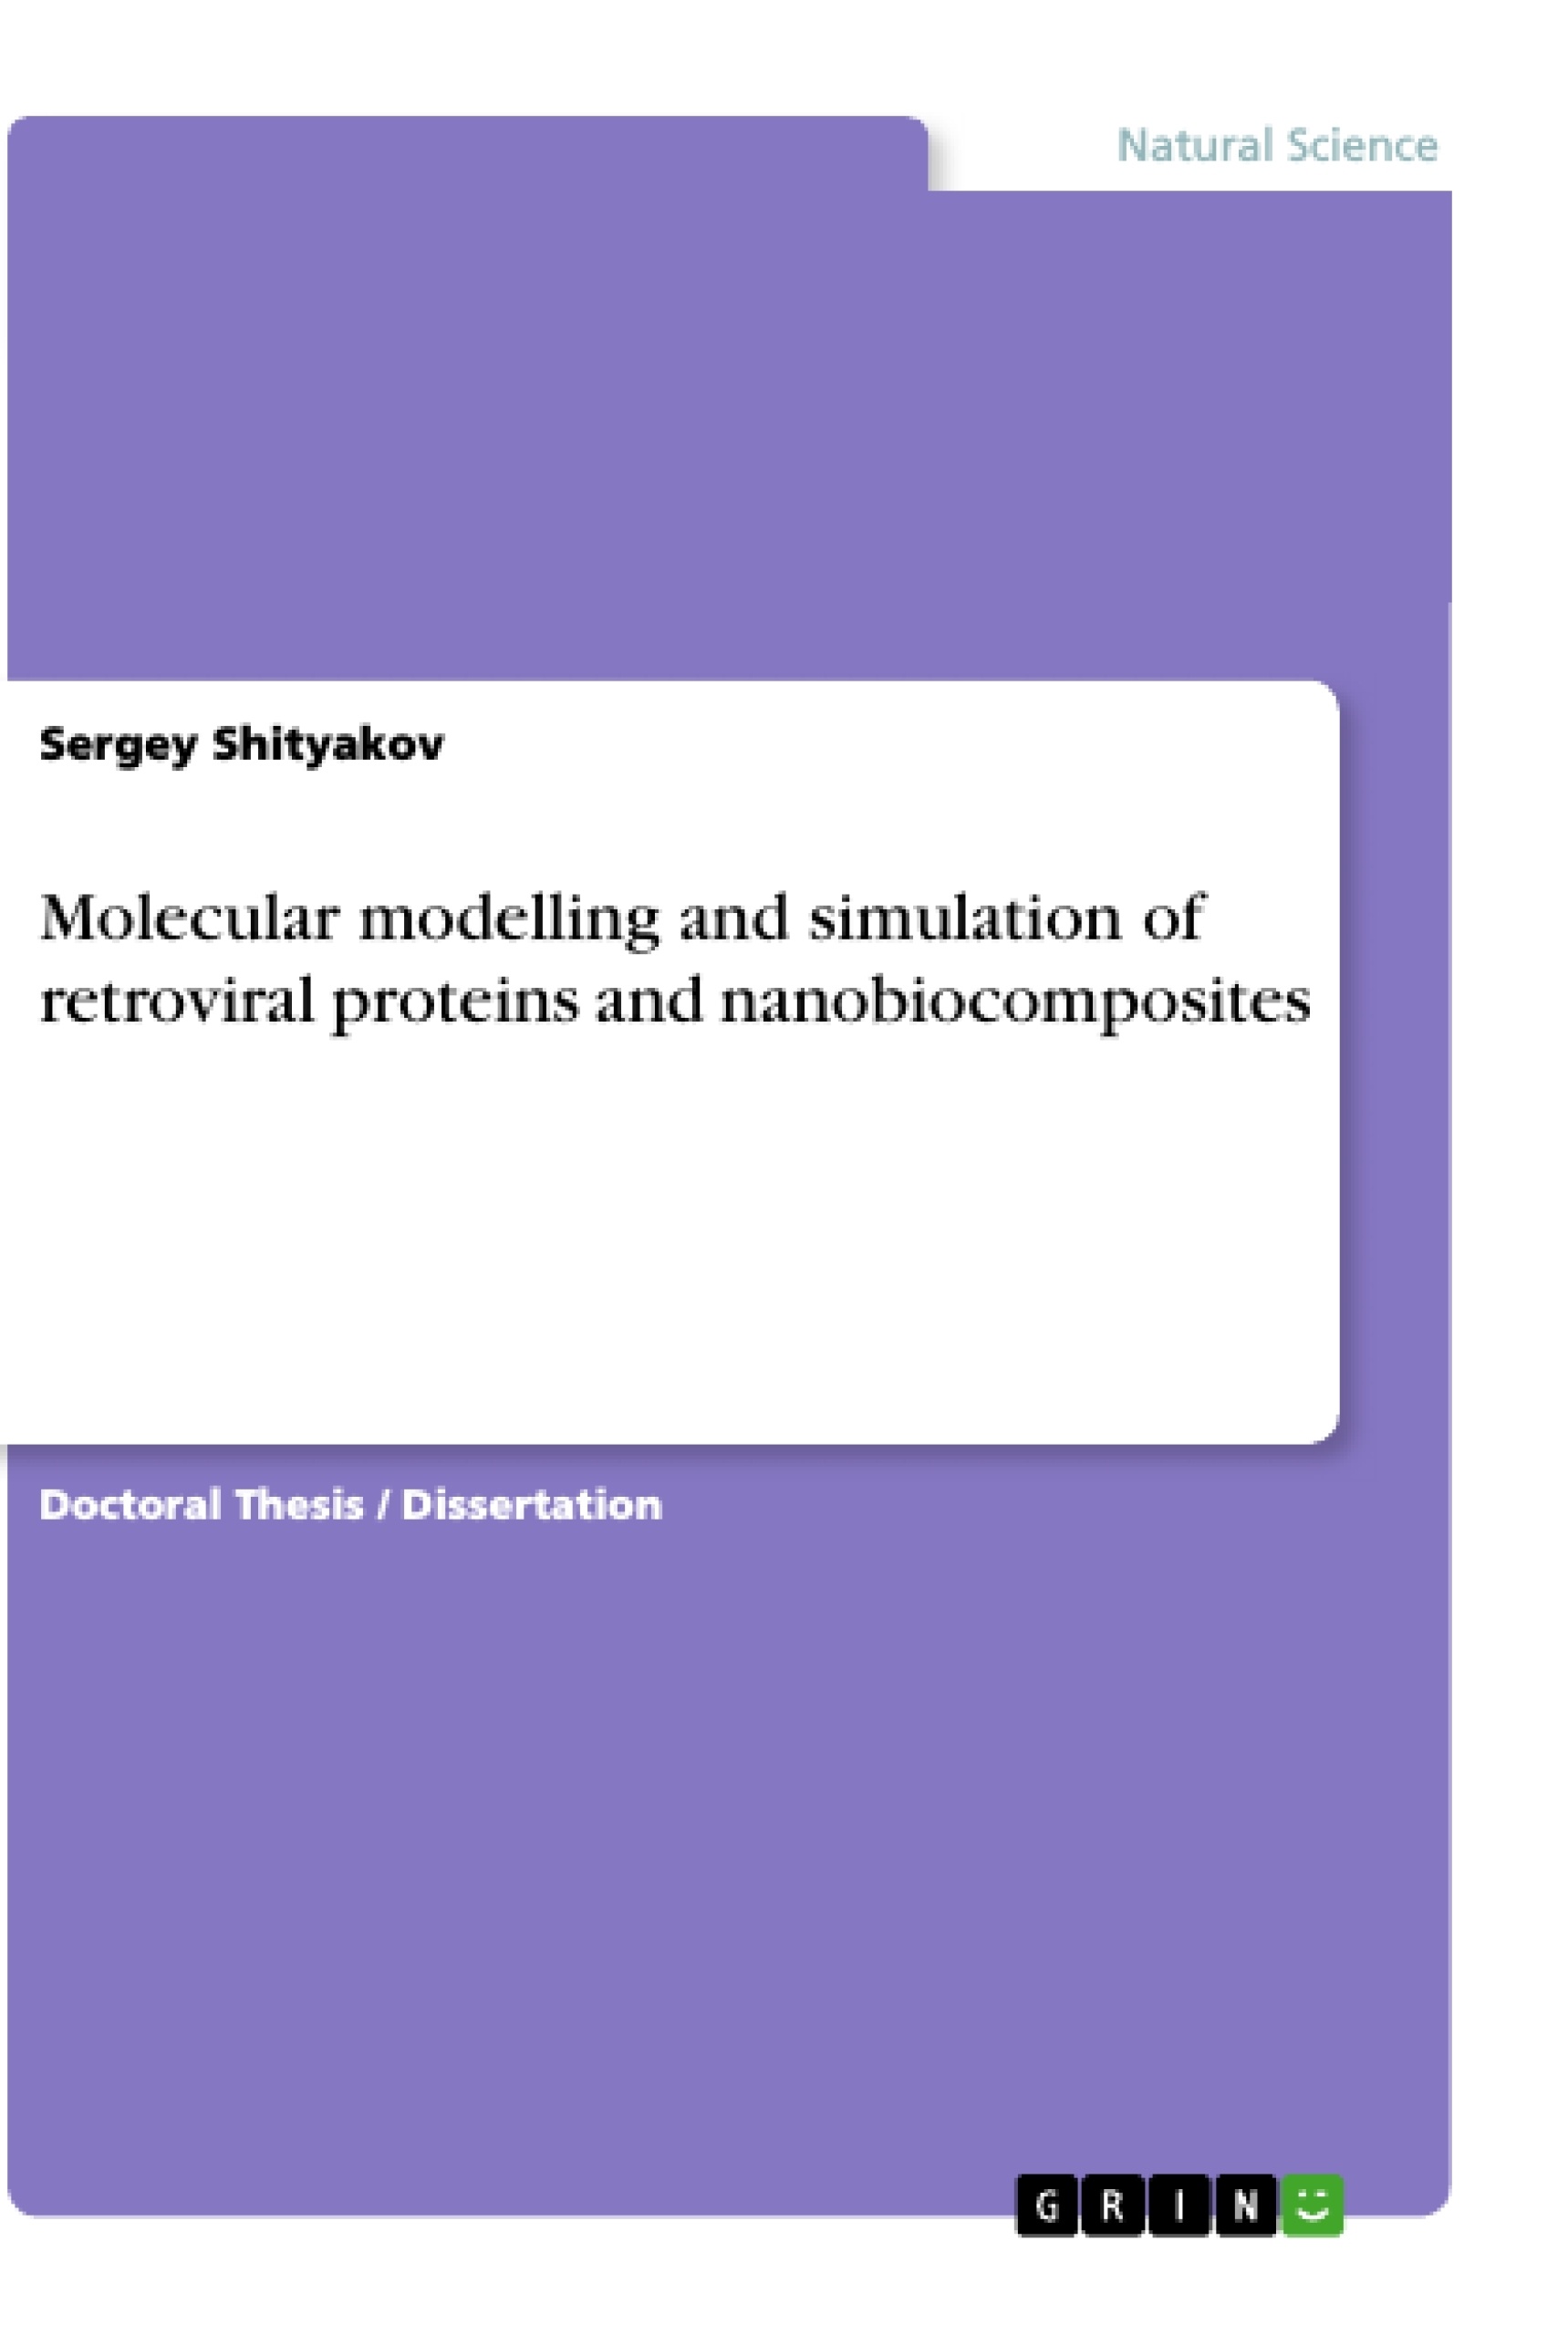 Titre: Molecular modelling and simulation of retroviral proteins and nanobiocomposites